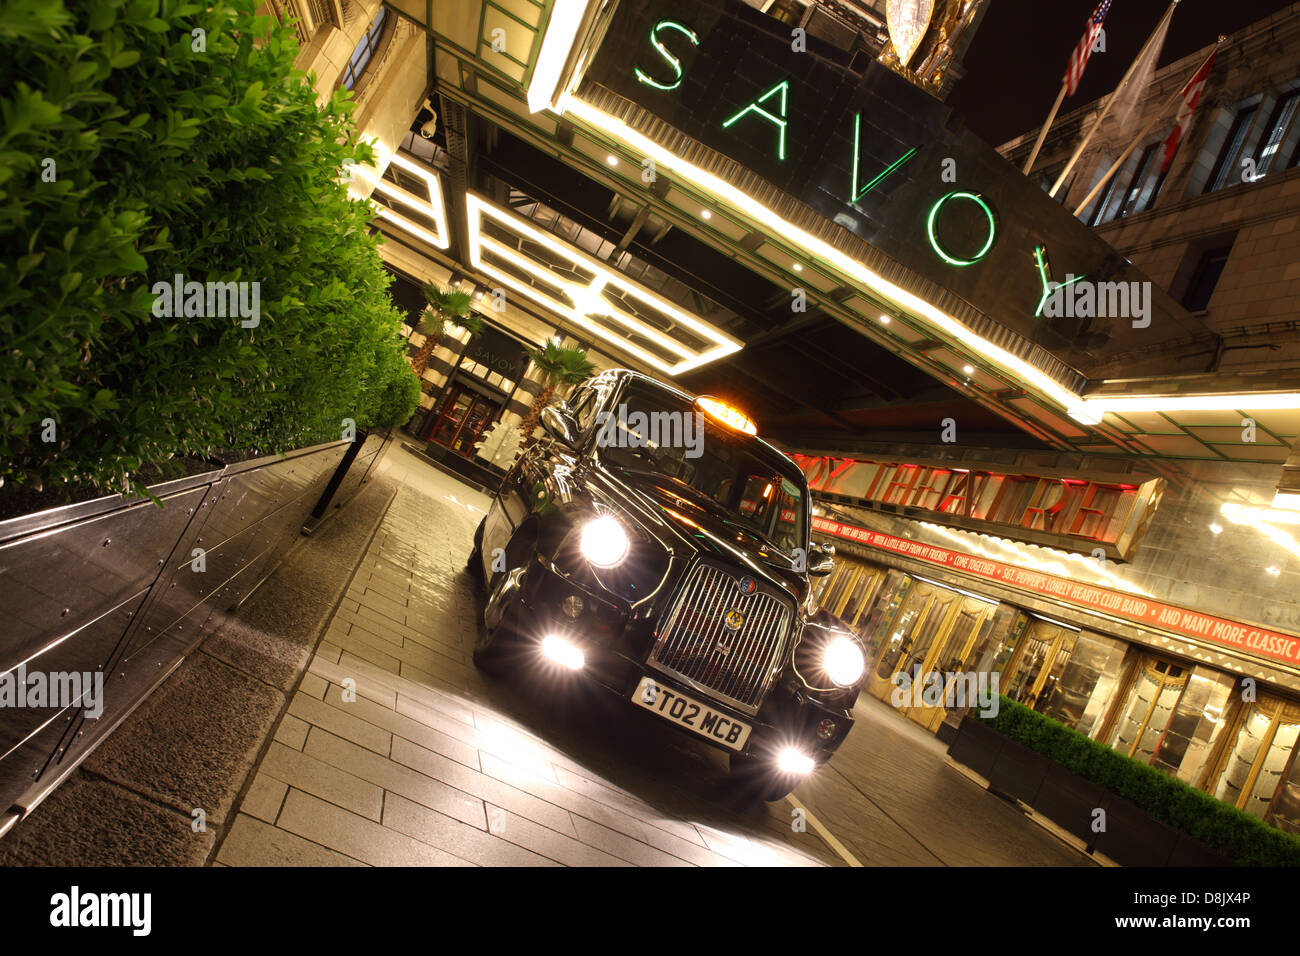 London Taxi, Black Cab, parked in the forecourt of the Savoy Hotel Stock Photo